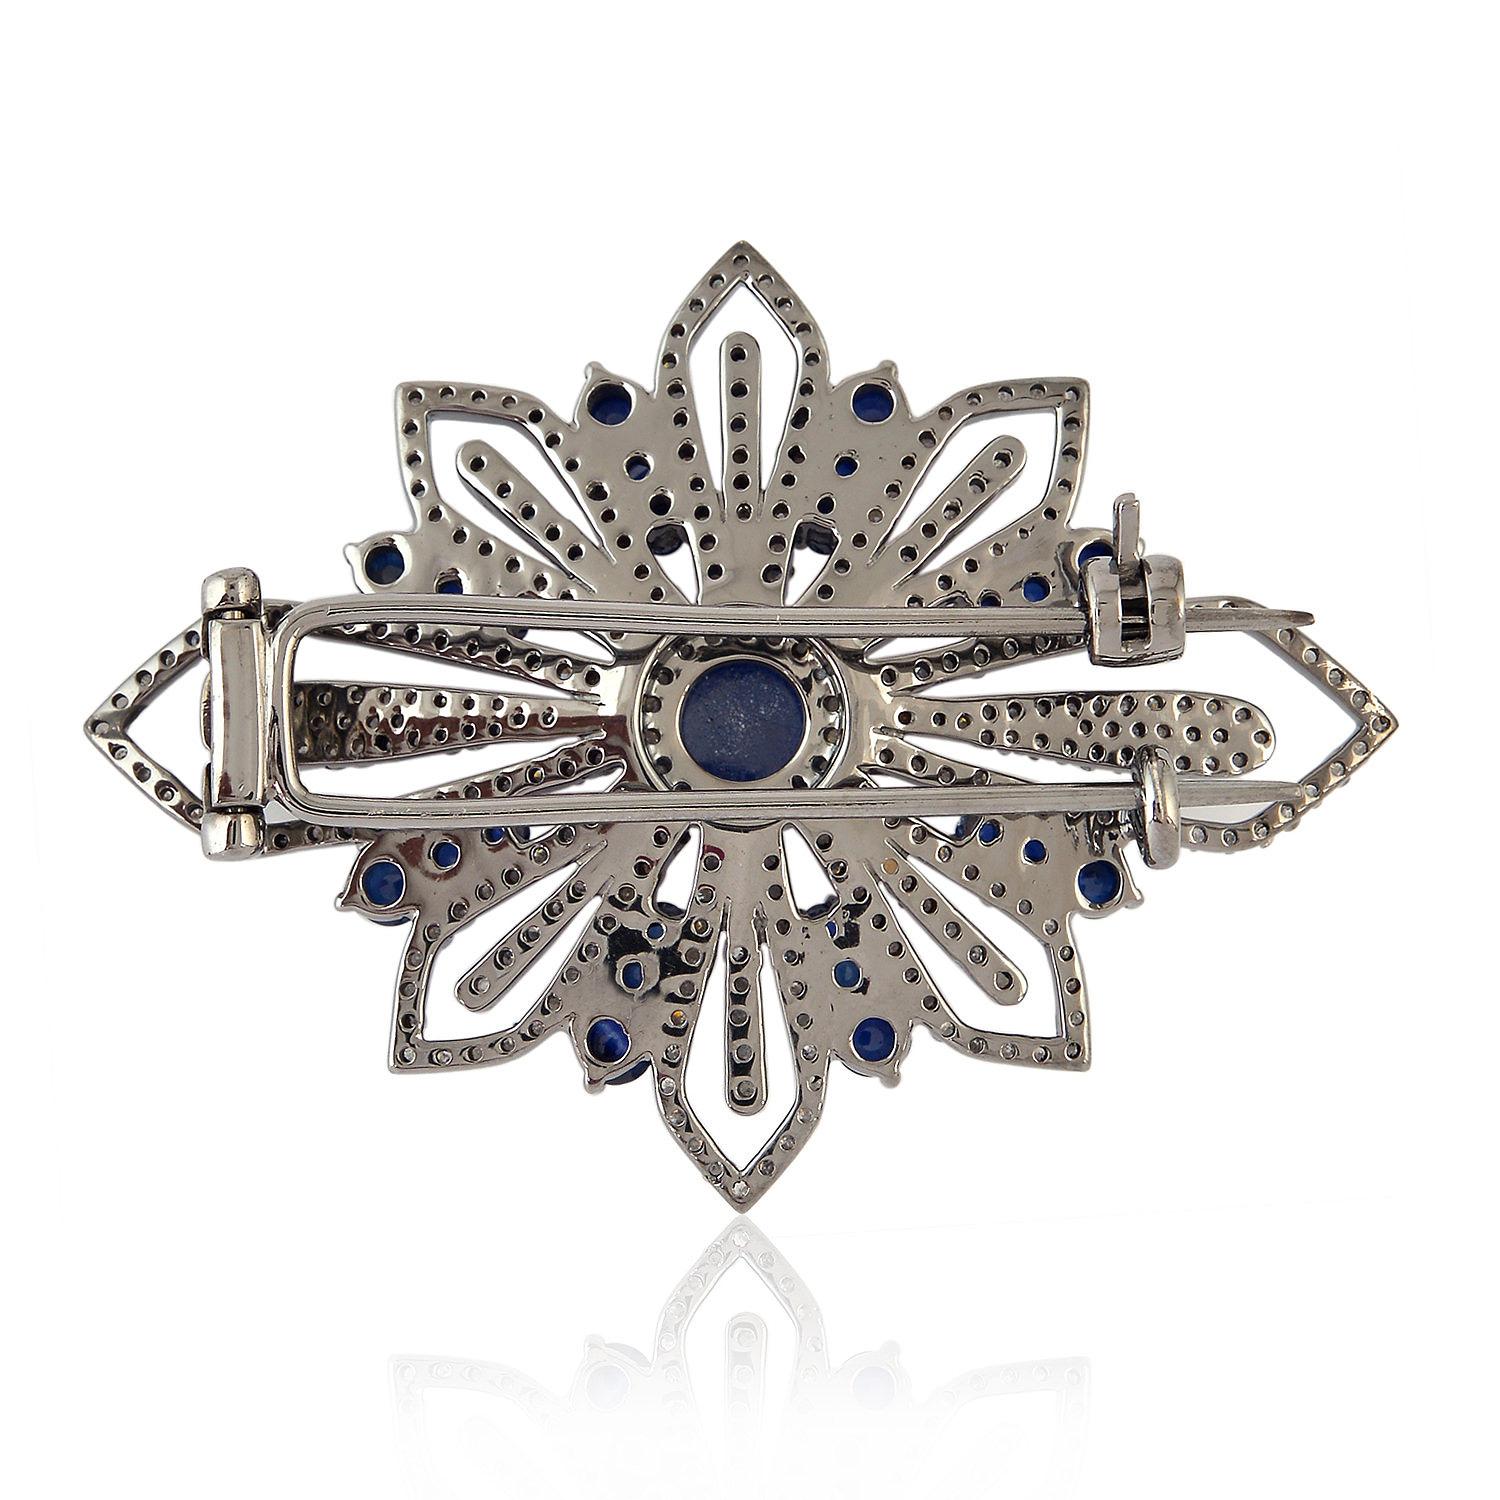 Cast in 18K gold and sterling silver. A stunning brooch hand set in 3.78 carats blue sapphire and 2.46 carats of sparkling diamonds.

FOLLOW  MEGHNA JEWELS storefront to view the latest collection & exclusive pieces.  Meghna Jewels is proudly rated